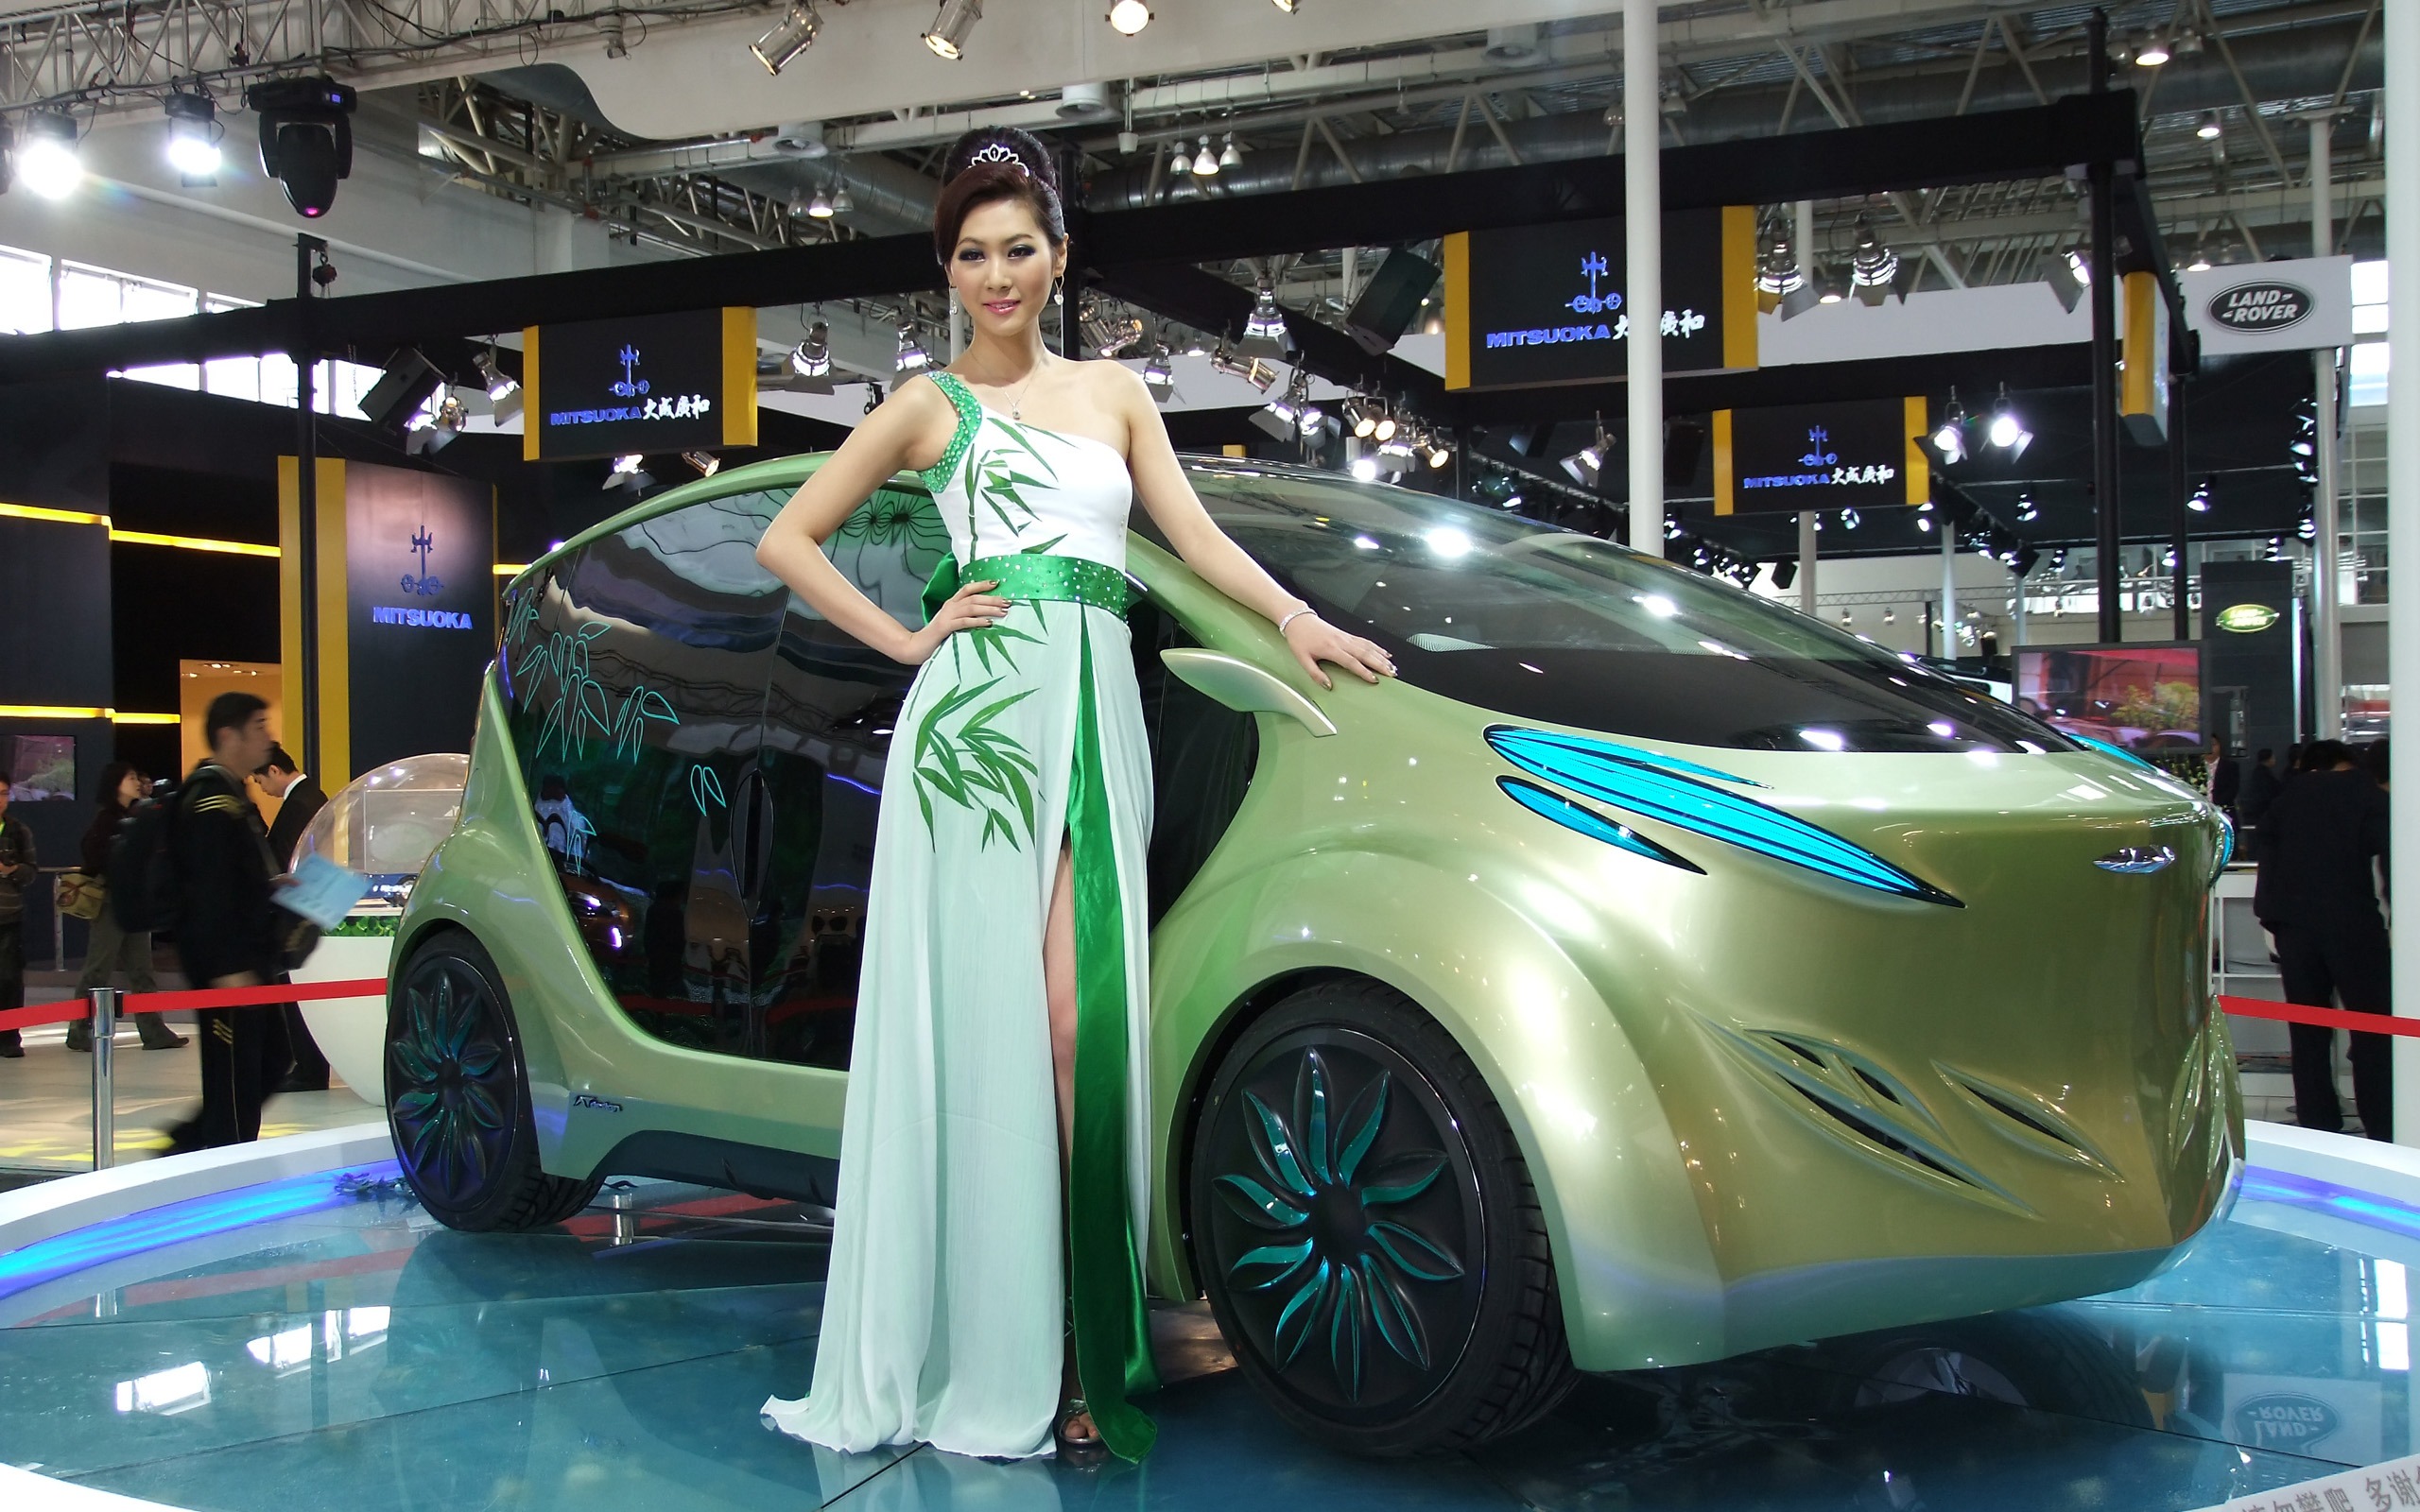 2010 Beijing Auto Show car models Collection (2) #2 - 2560x1600